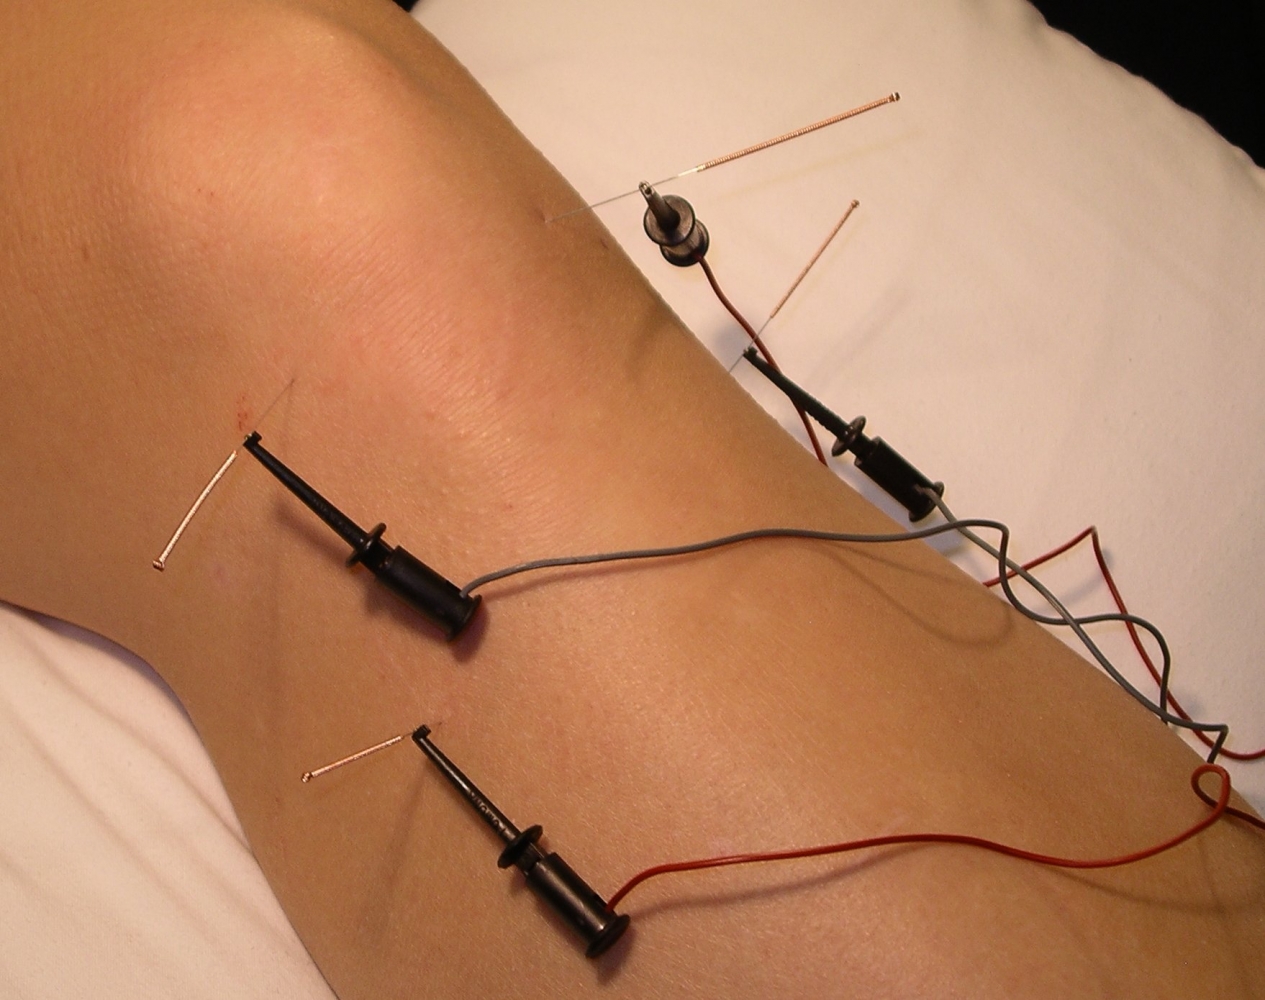 Using Electronic Stimulation with Acpuncture